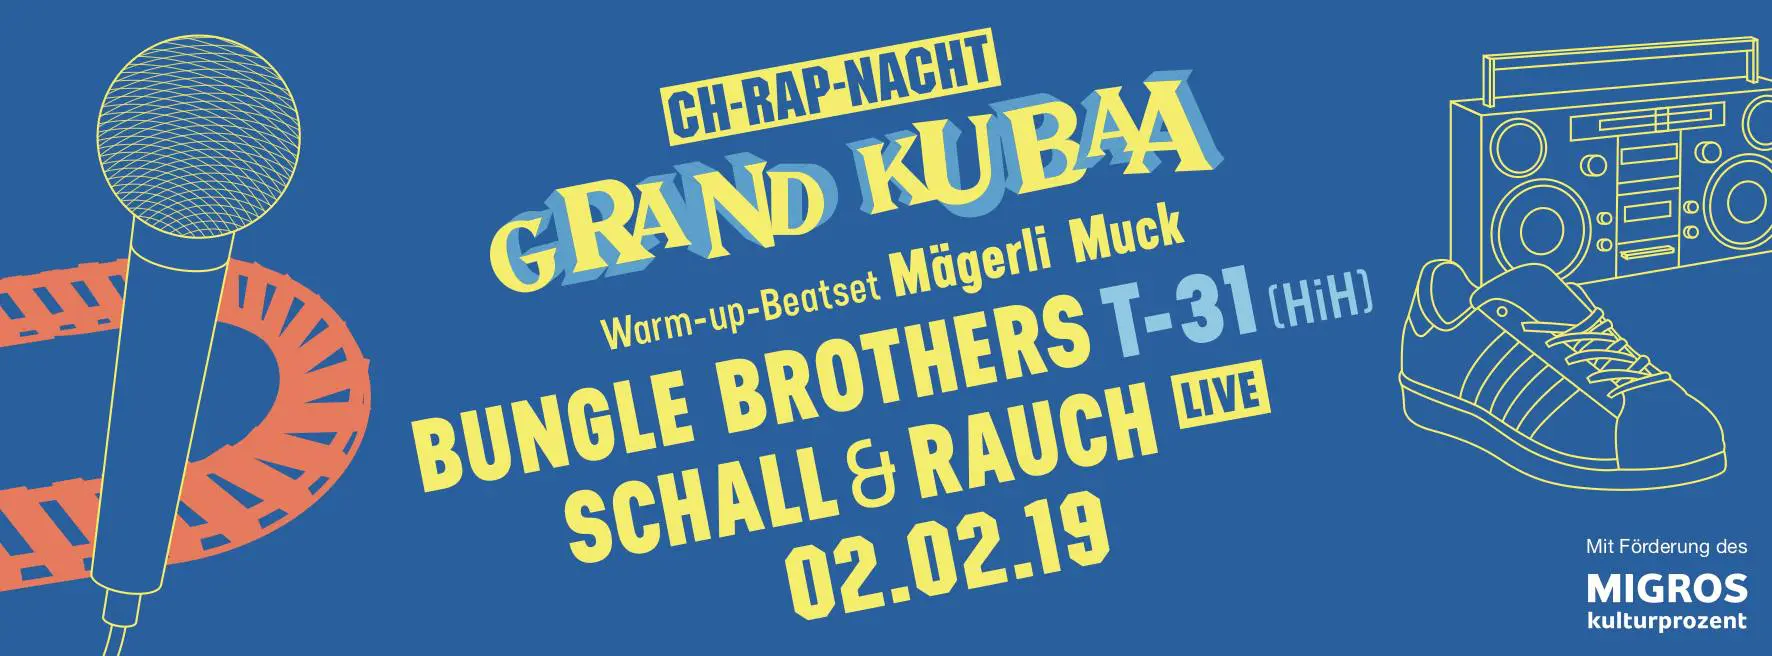 grand_kubaa_8_feat_bungle_brothers_and_t-31_hih_flyer_2019